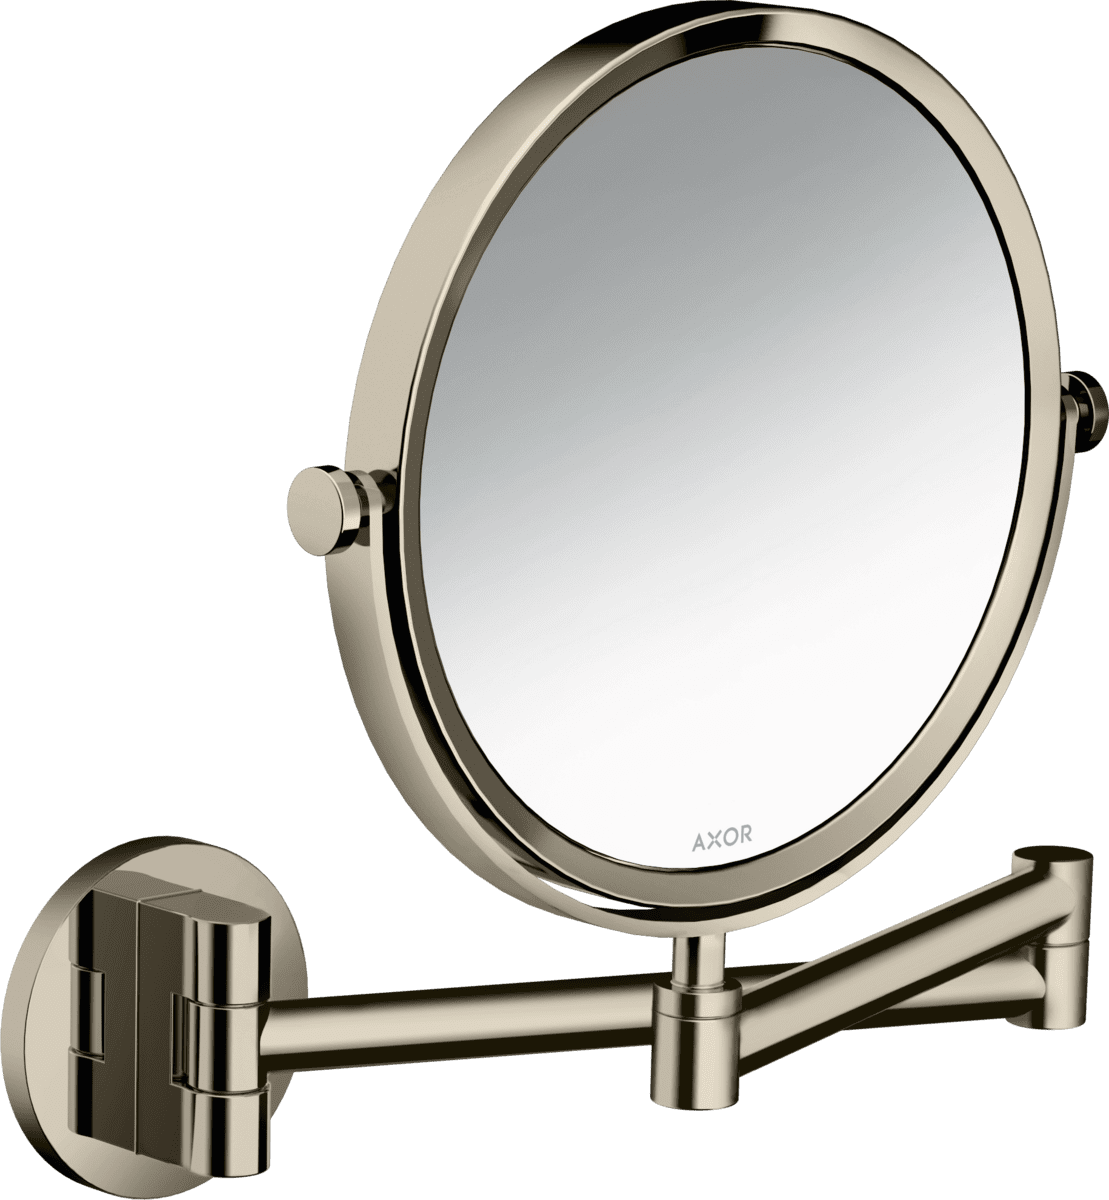 Picture of HANSGROHE AXOR Universal Circular Shaving mirror #42849830 - Polished Nickel